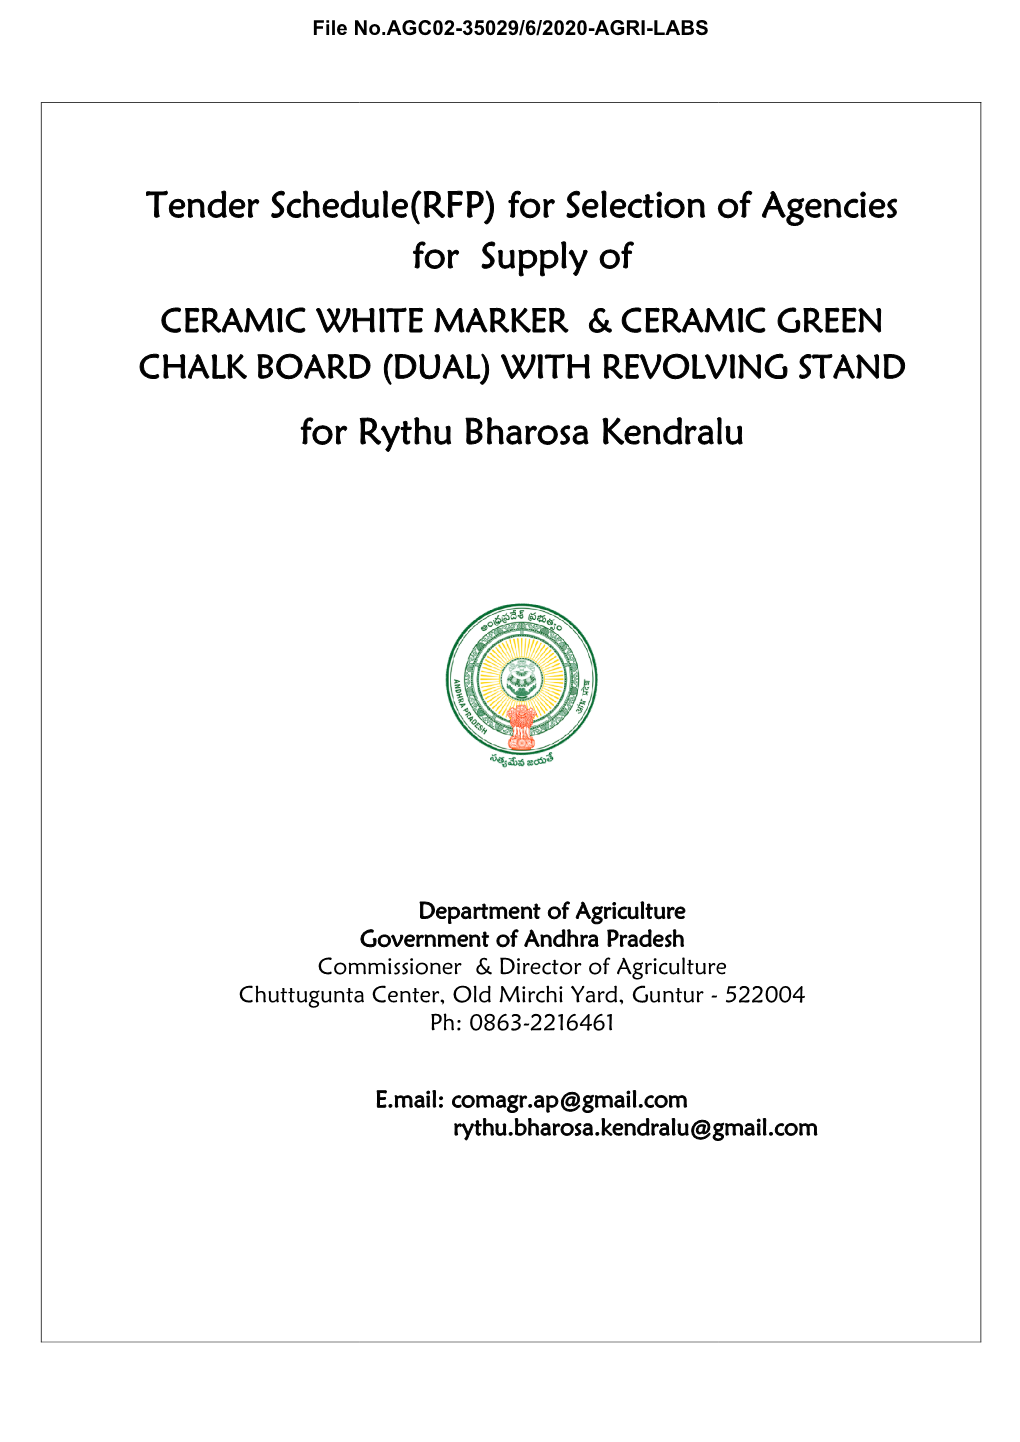 For Selection of Agencies for Supply of for Rythu Bharosa Kendralu